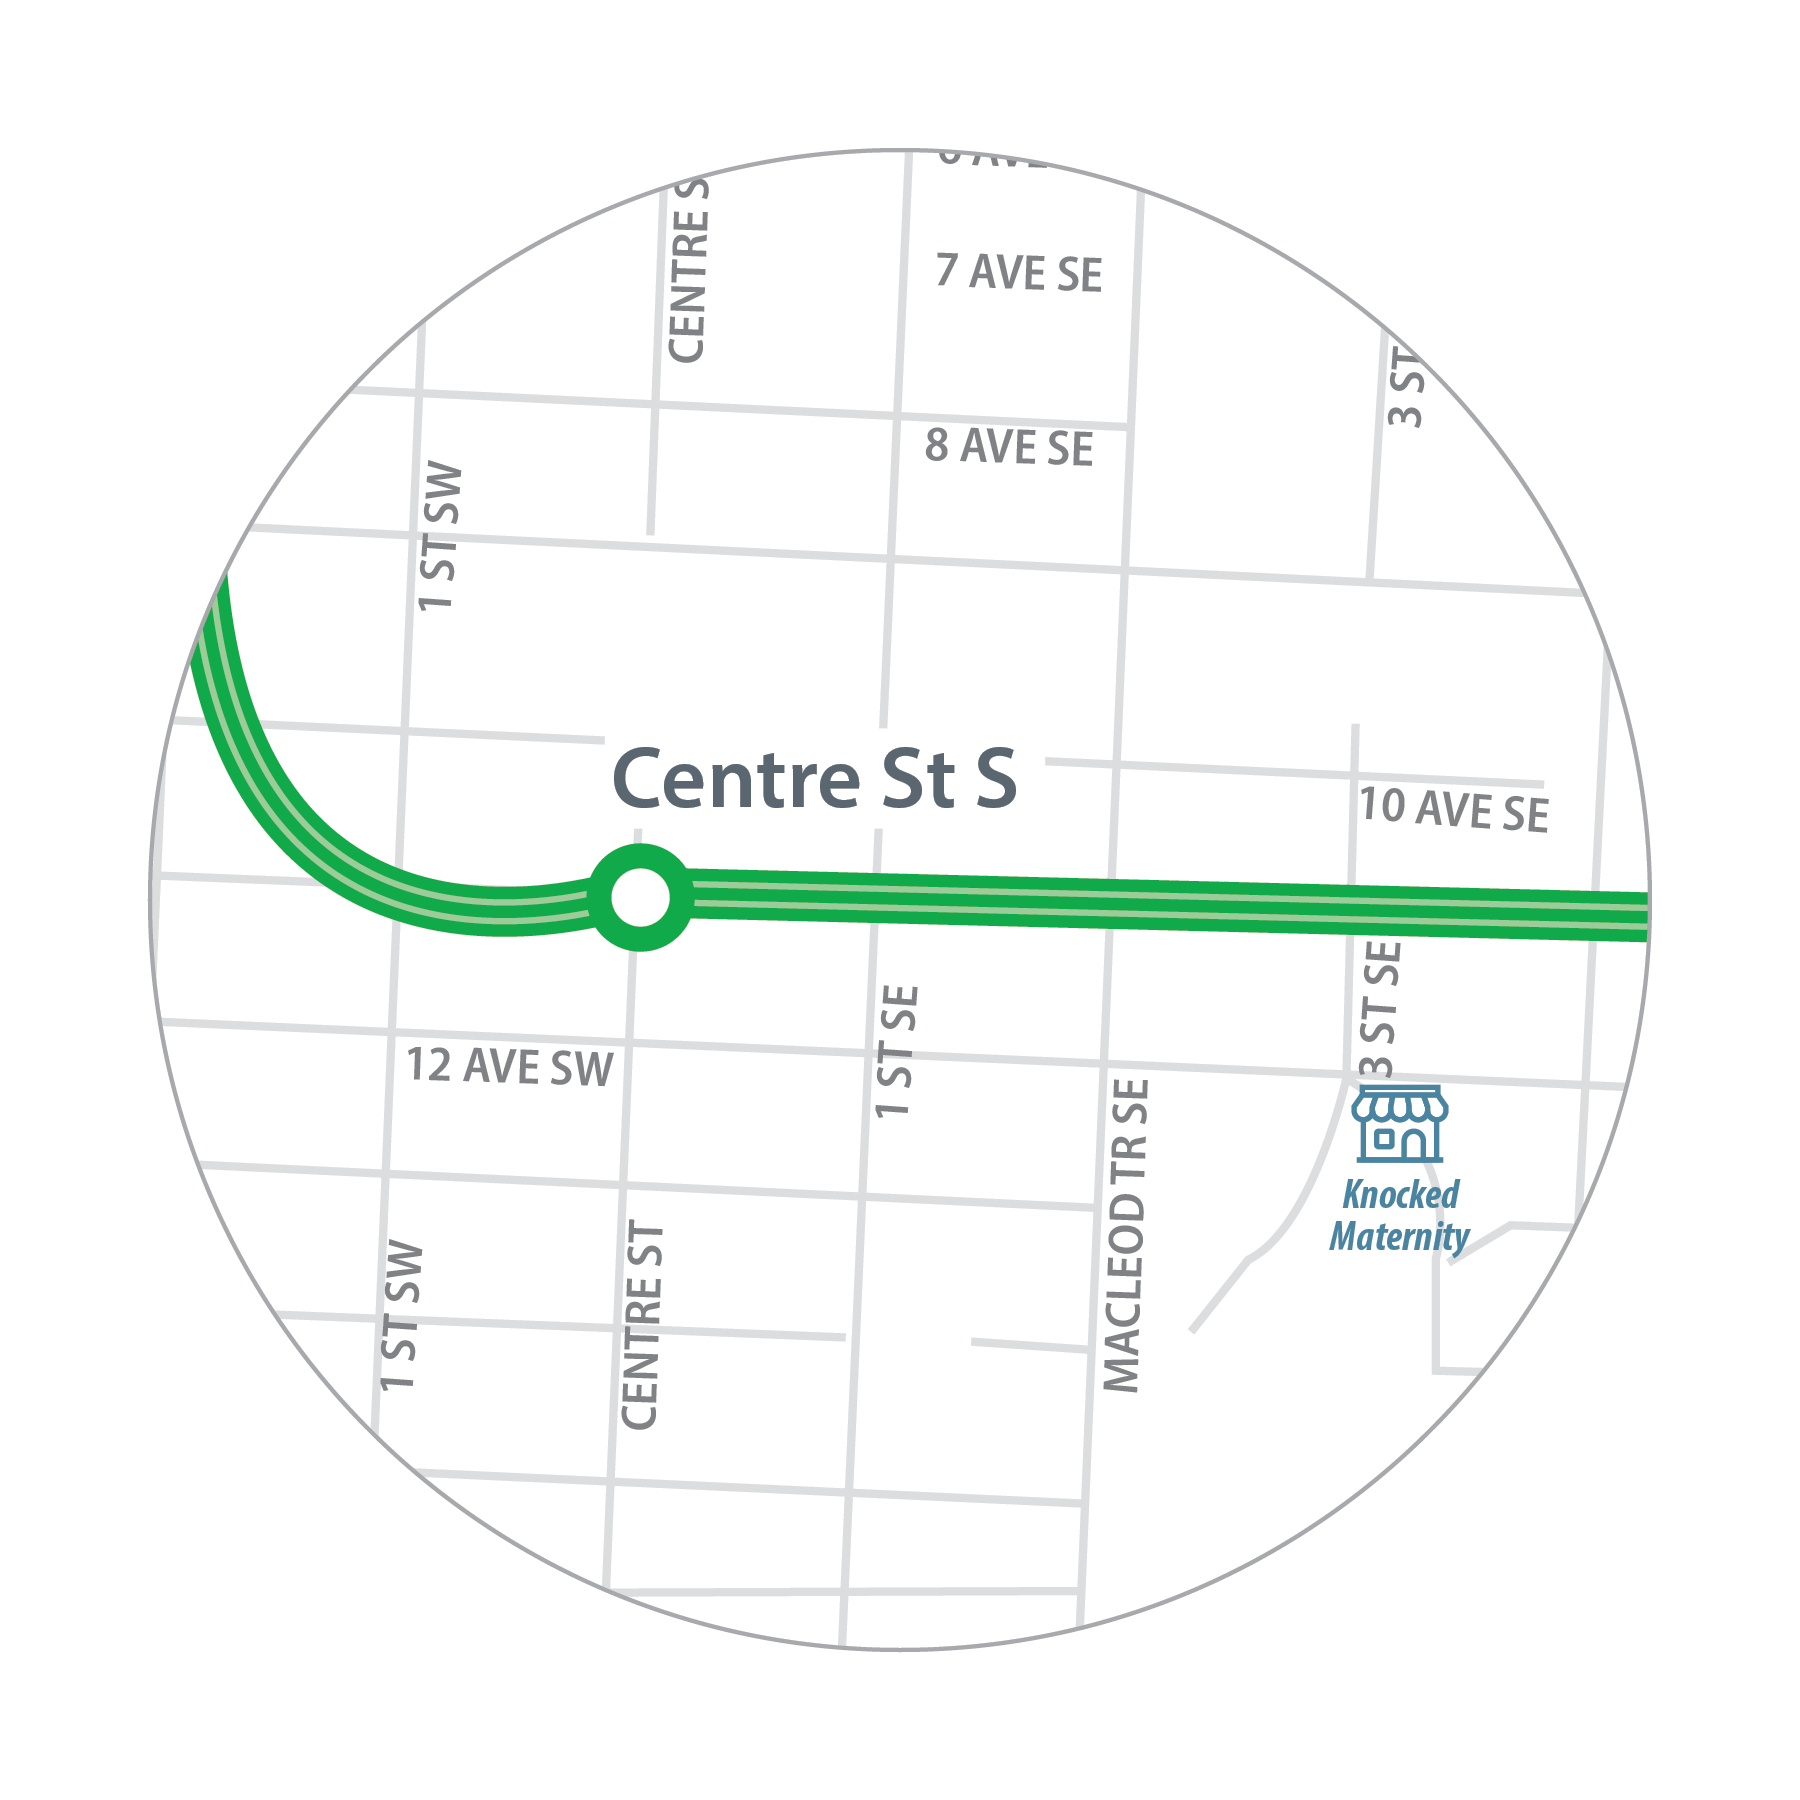 Map of KNOCKED Consignment location in relation to Centre Street S. Station.